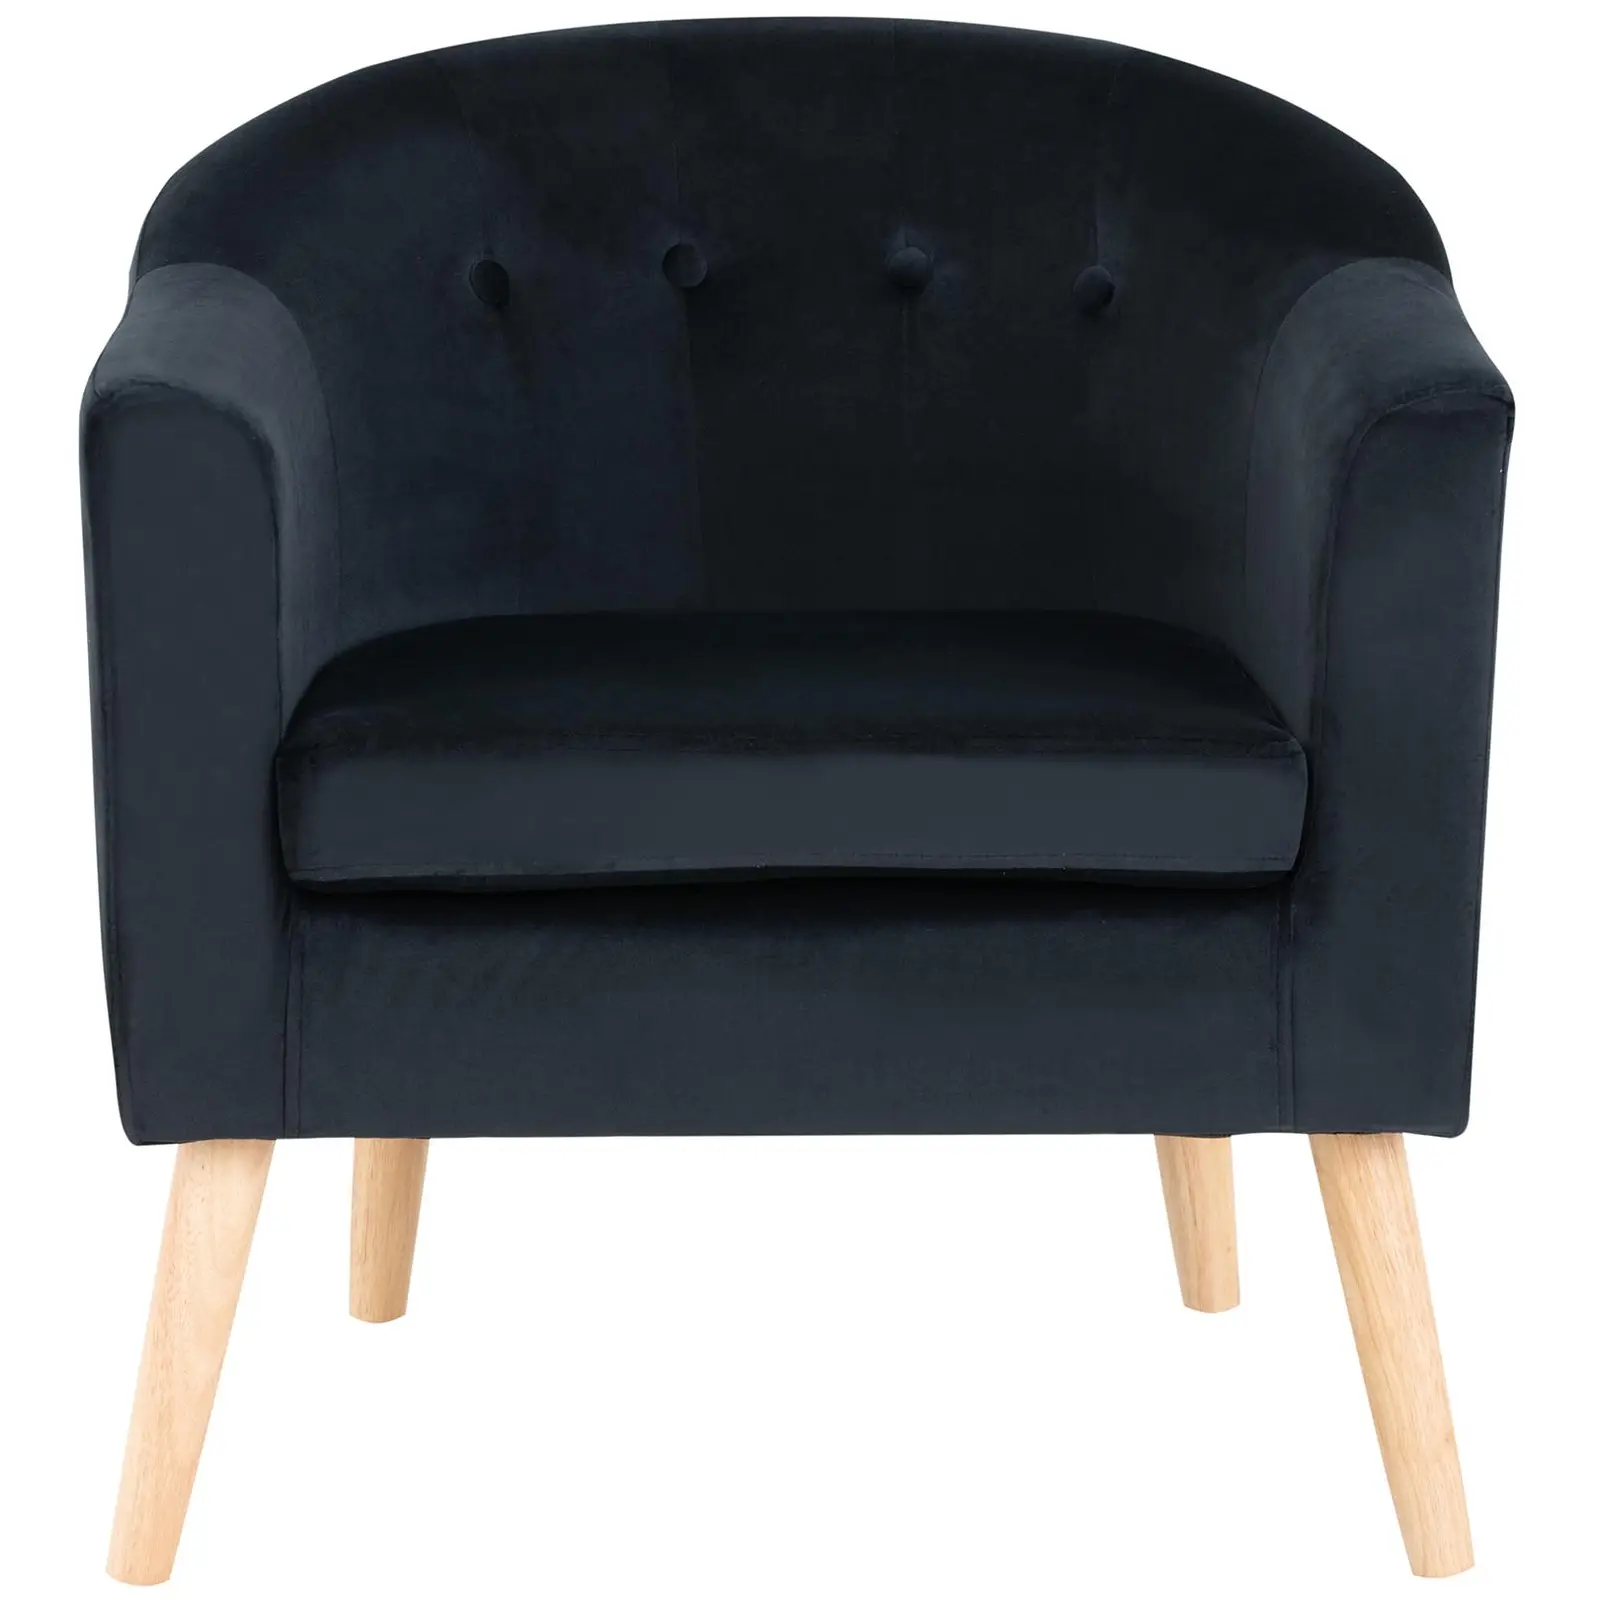 Cushioned Chair - up to 180 kg - seat 49 x 53 cm - black